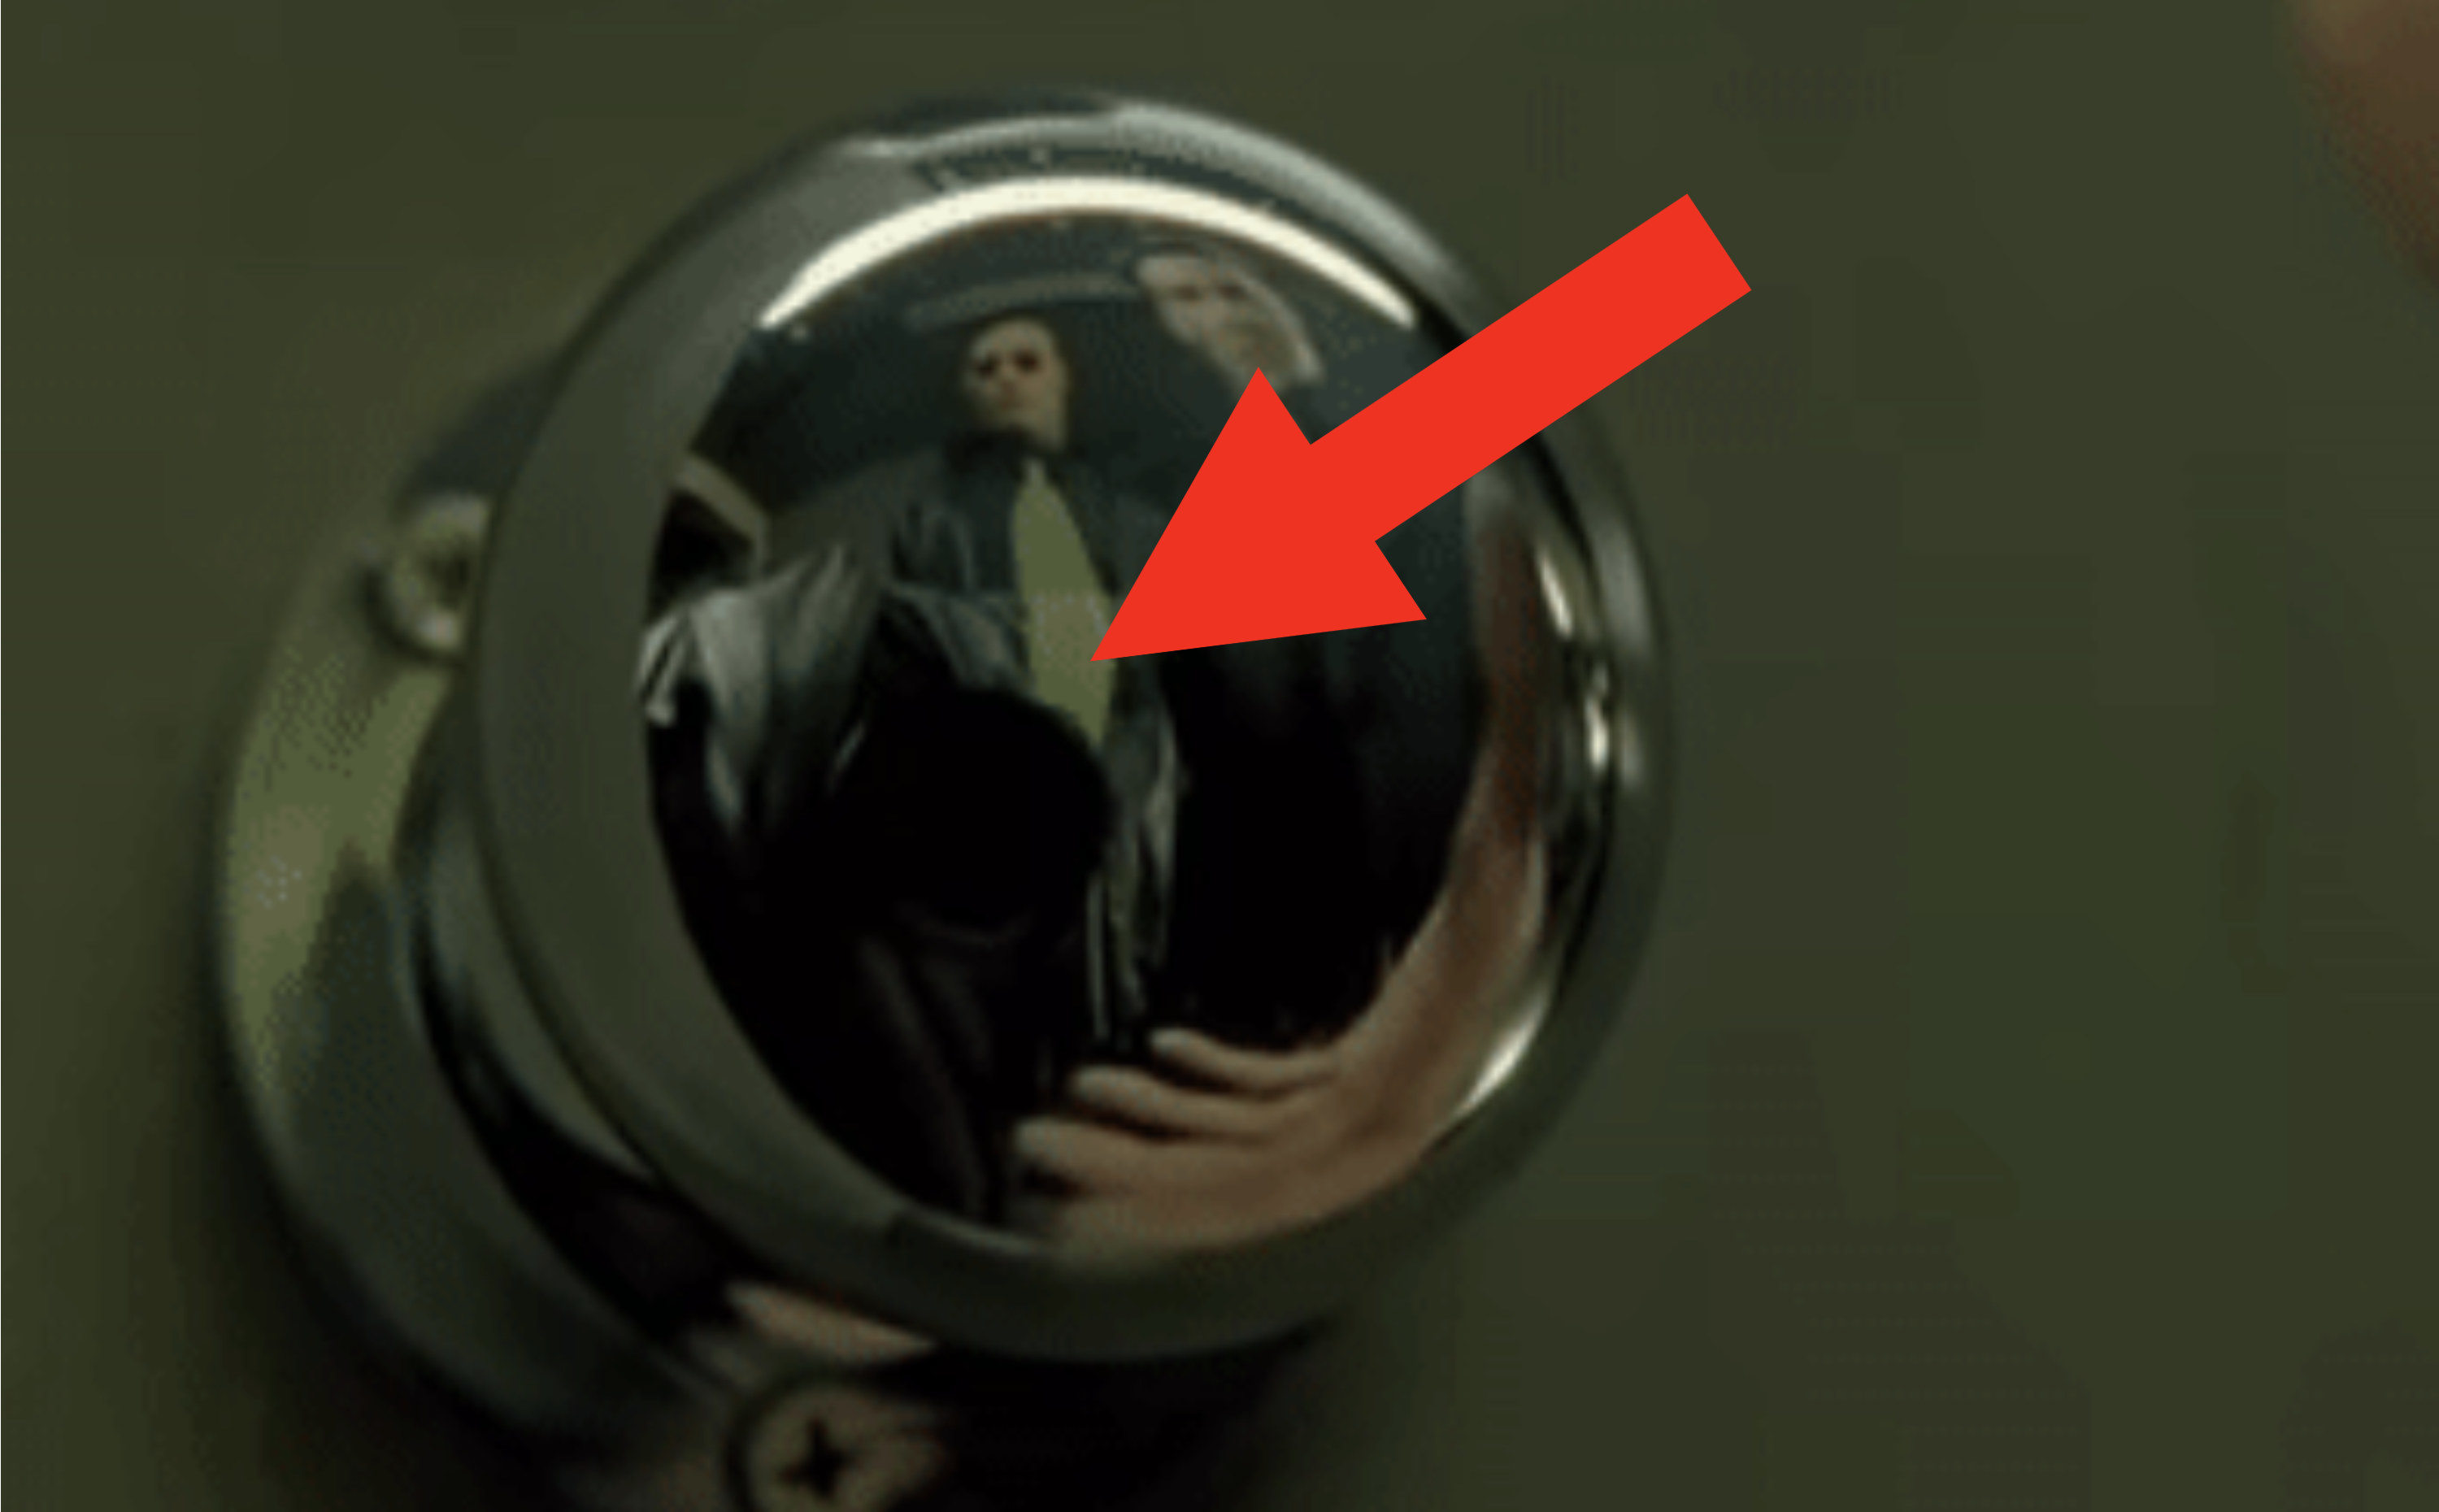 Closeup of the doorknob with a cameraman in the reflection